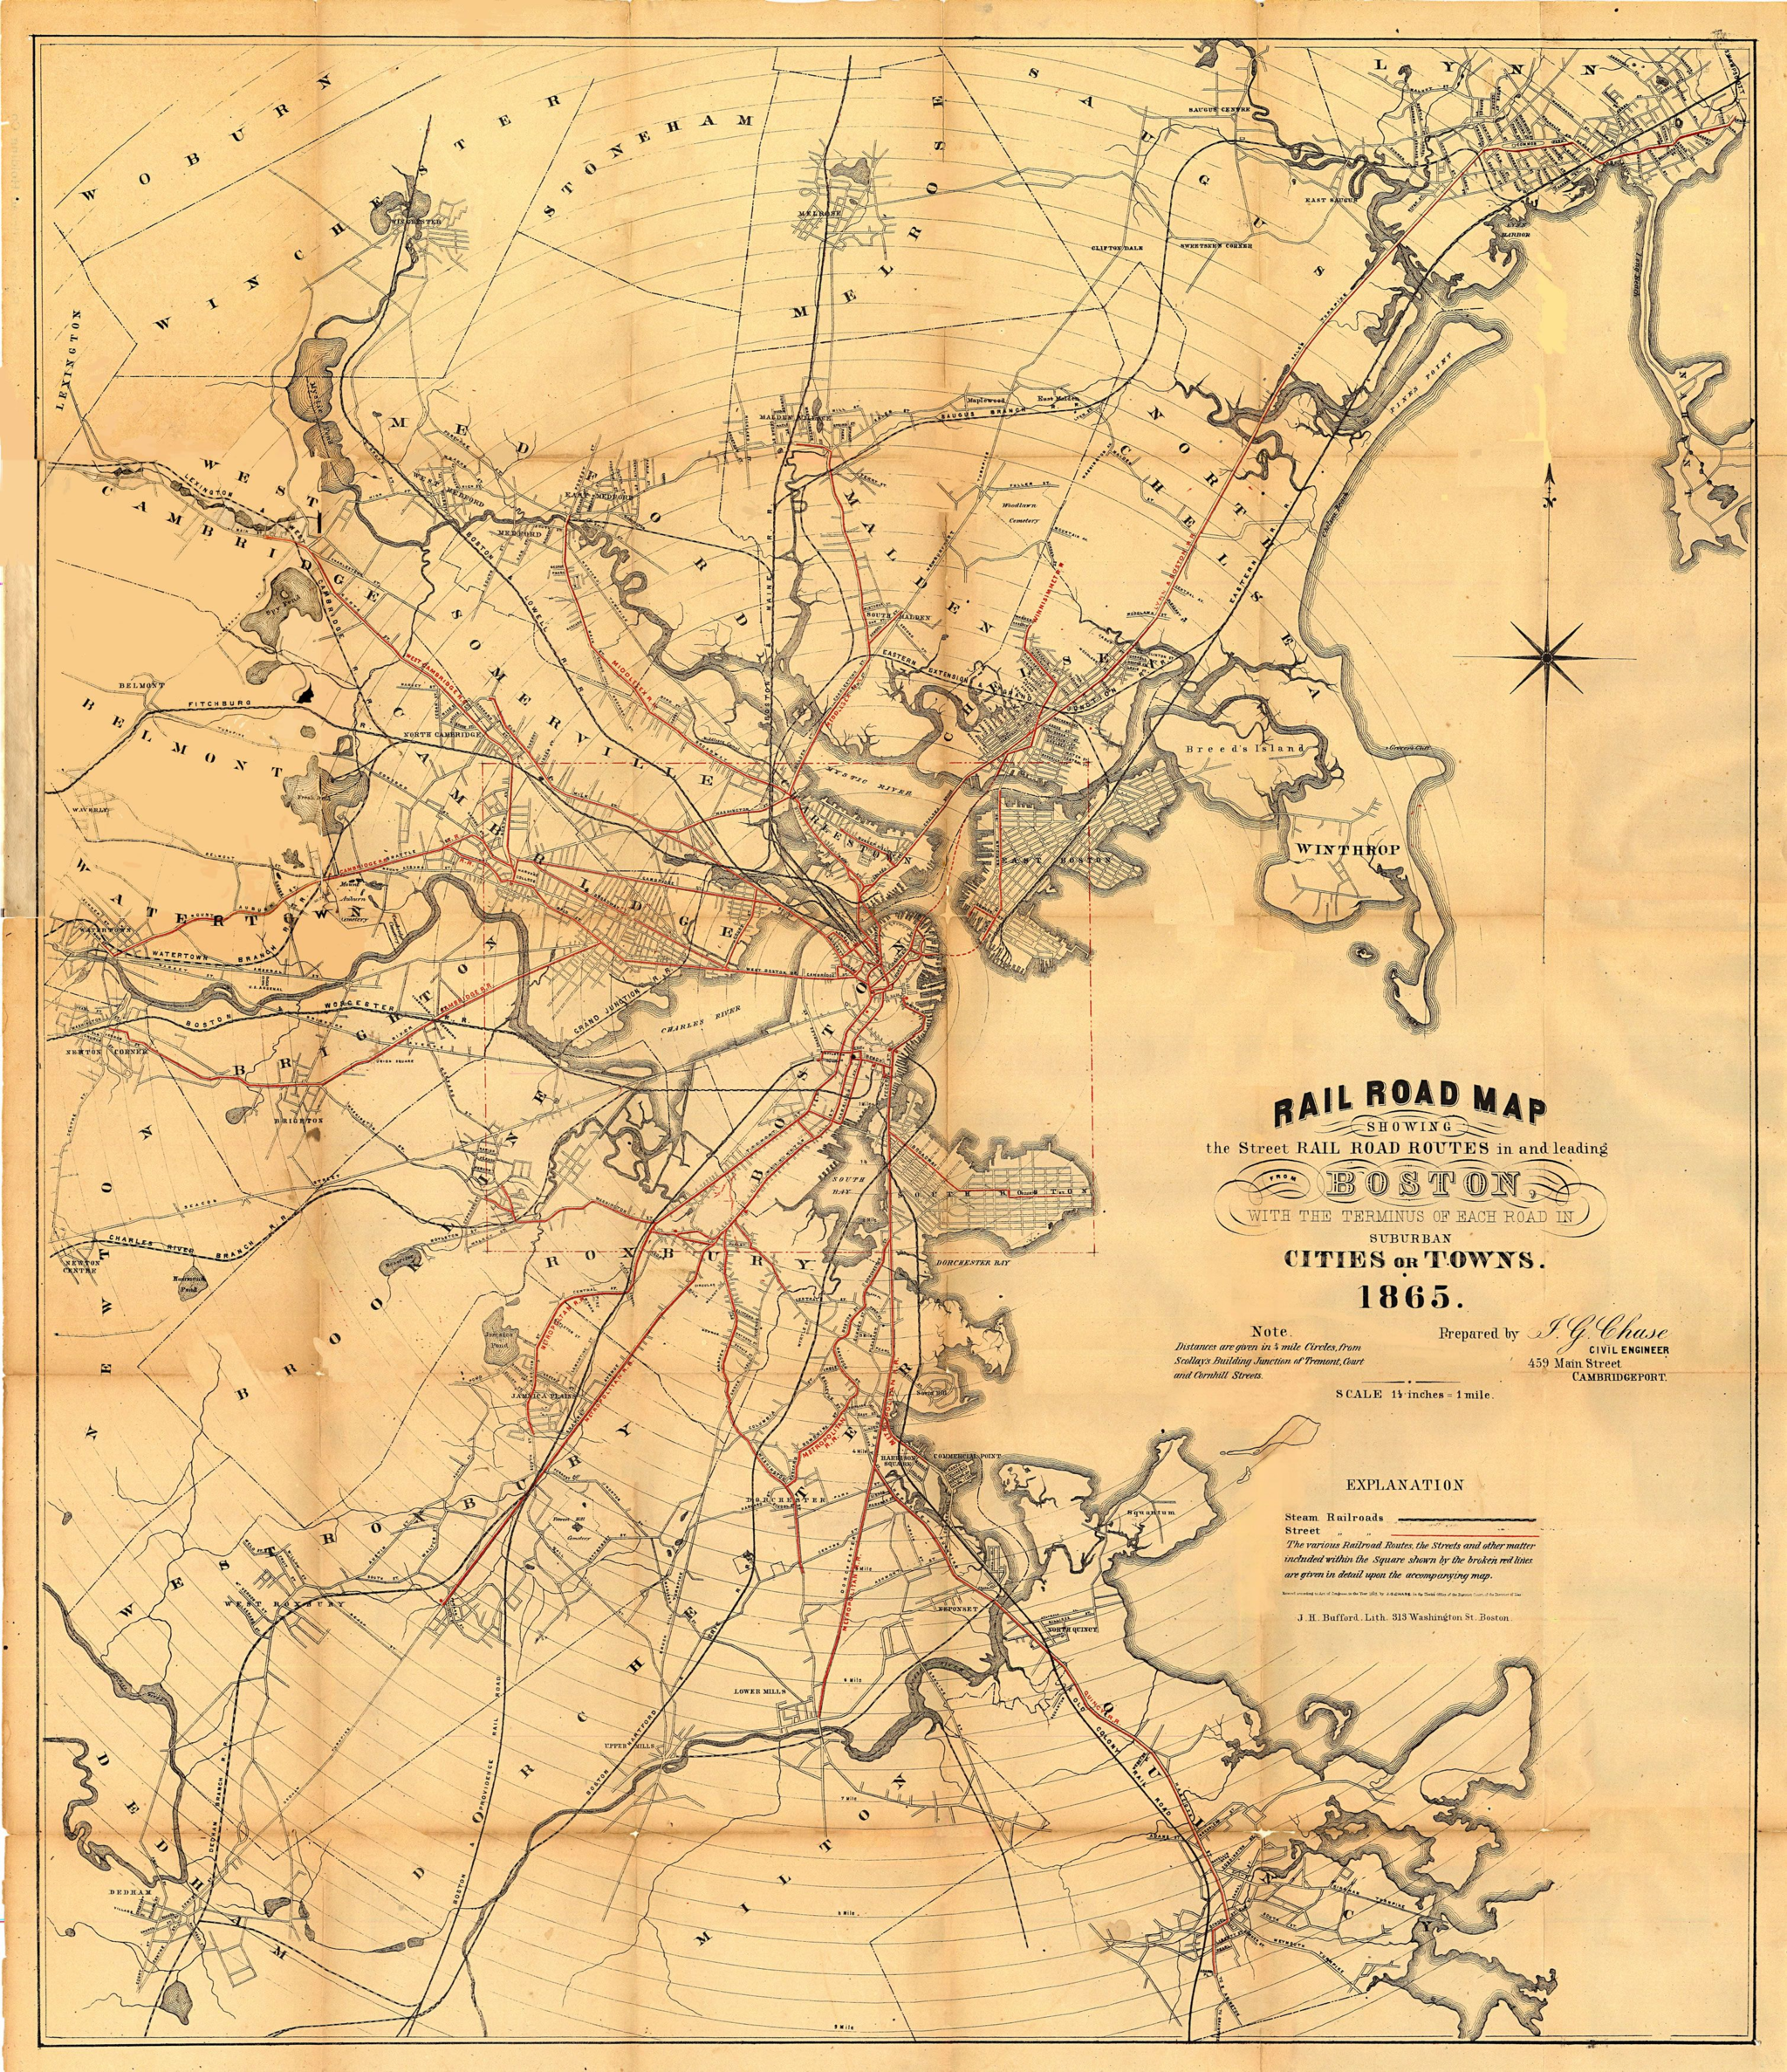 Boston's roadways for horsecars and rail in 1865.